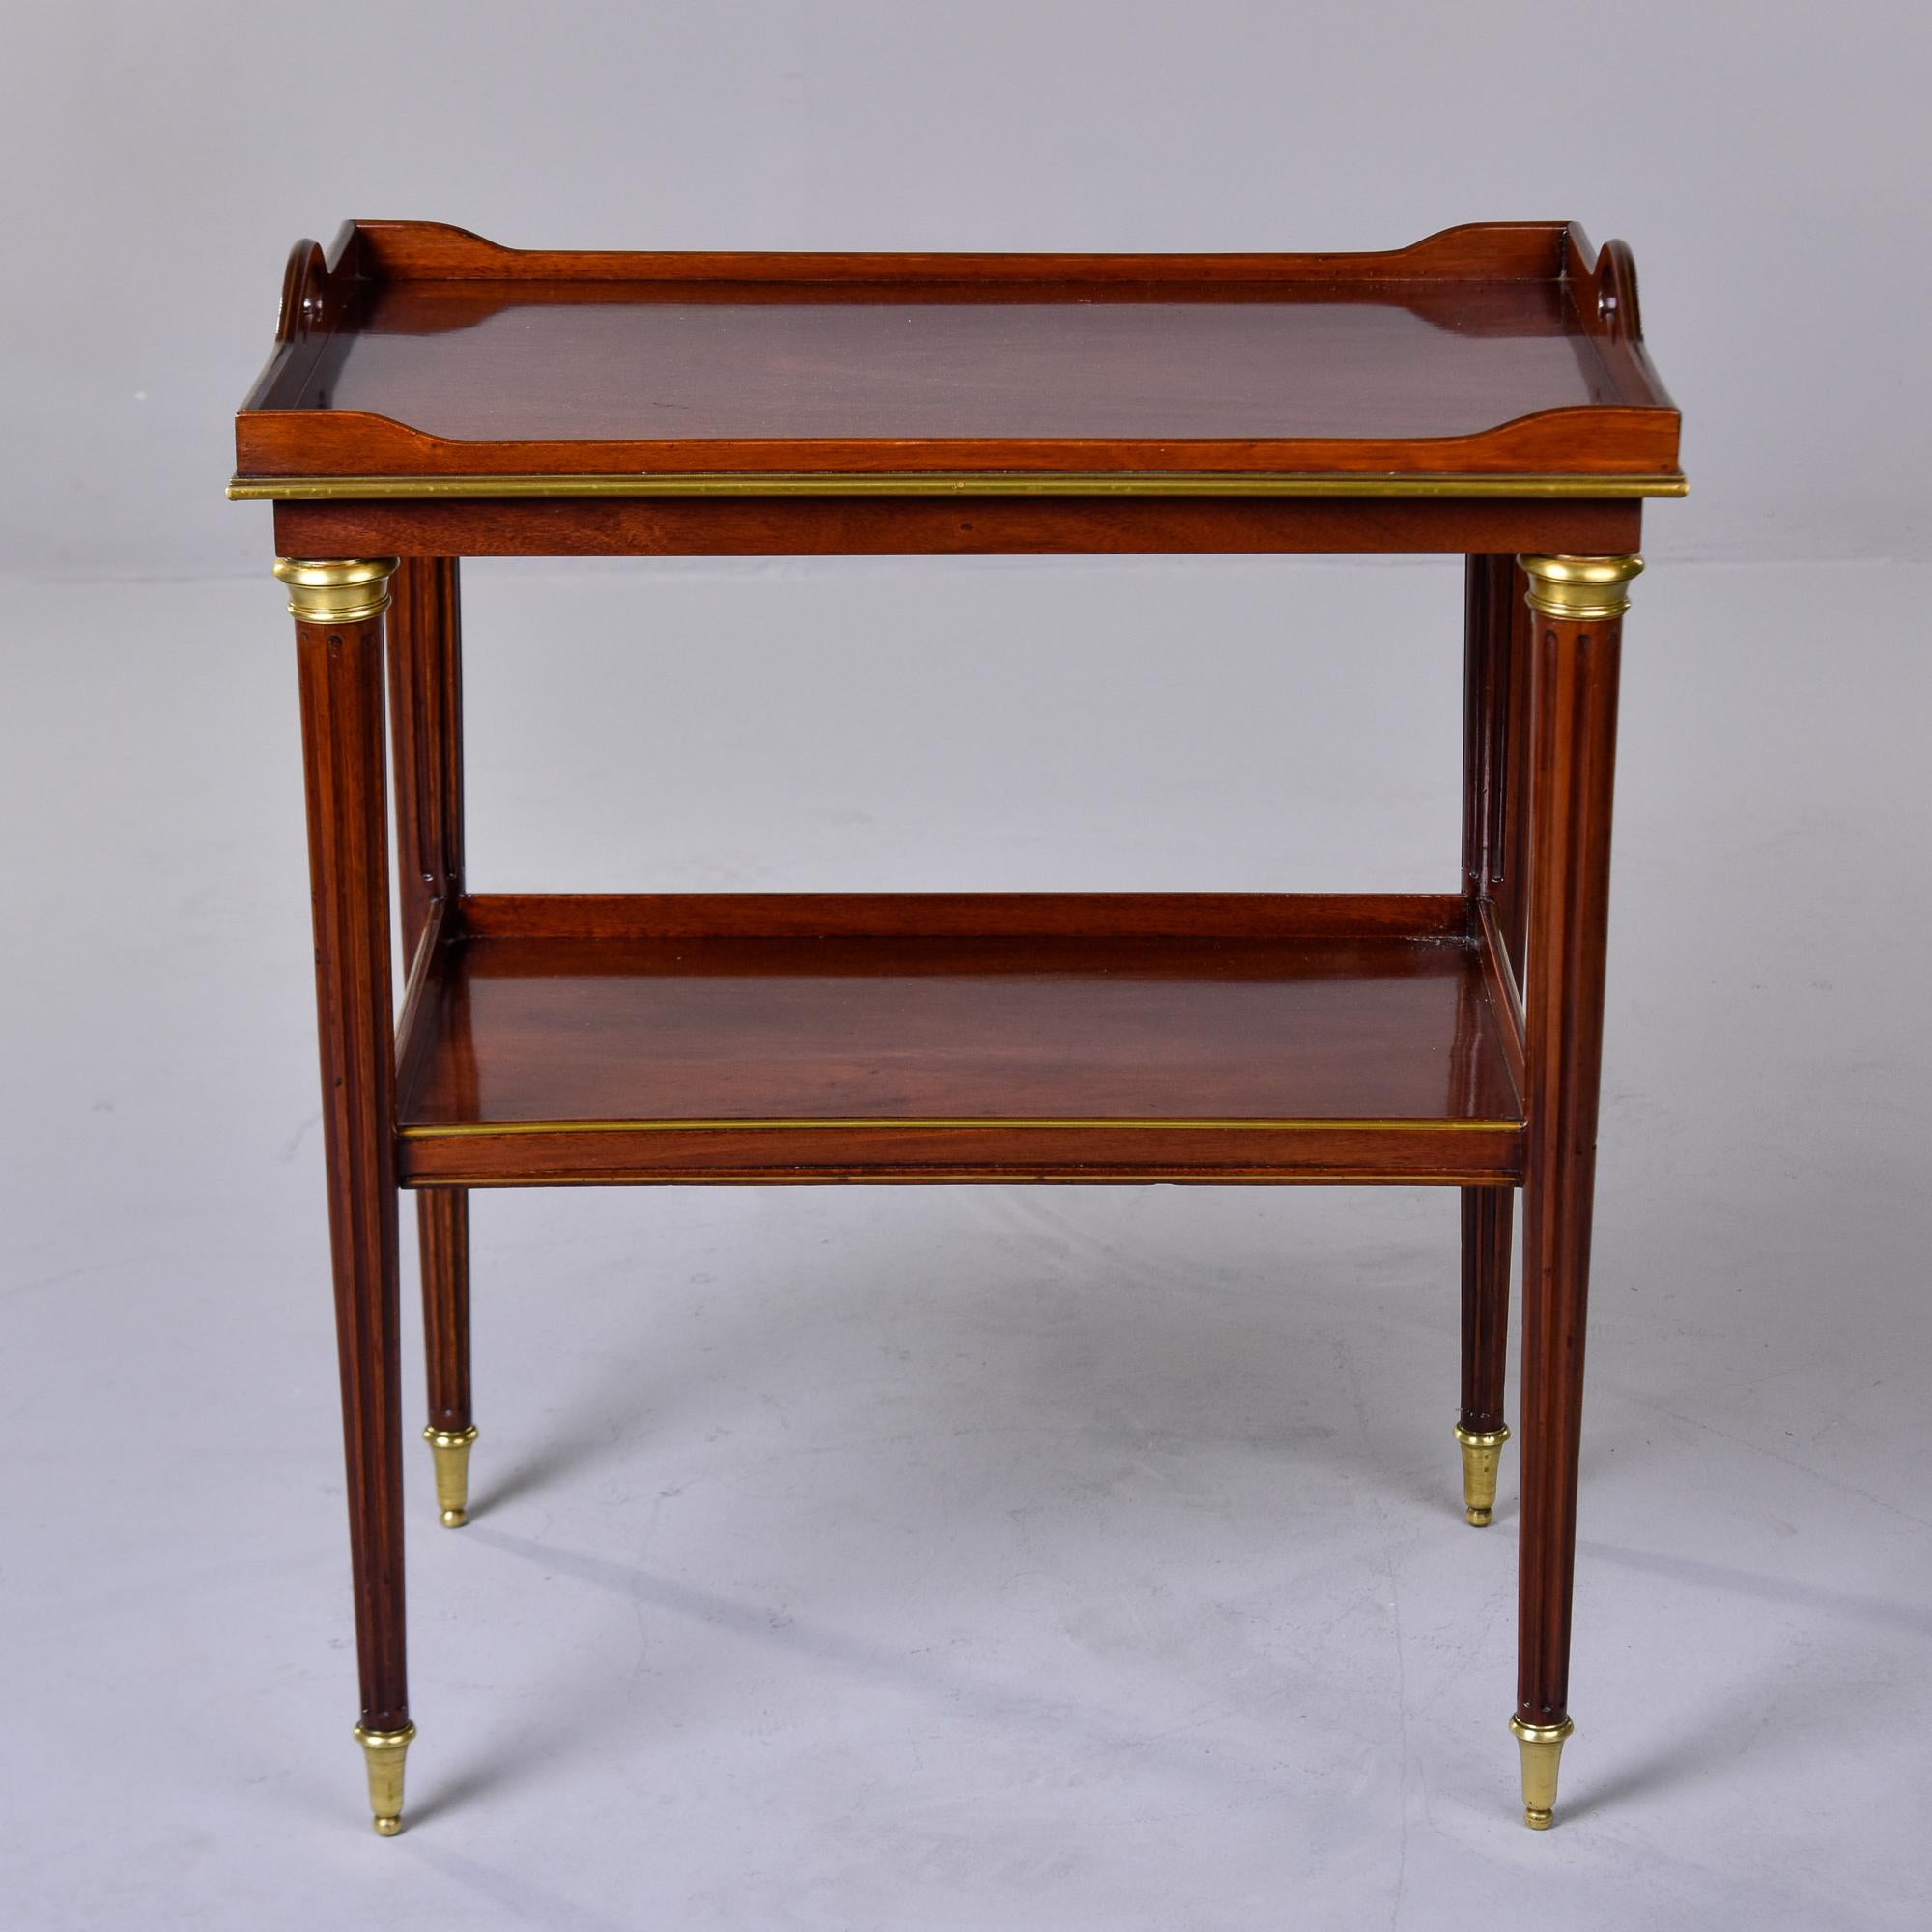 This French Louis Philippe style mahogany tray top side table dates from the 1930s. The top is shaped like a tray but does not lift off. Trimmed in brass at the base of the tray, top of the legs and the tapered, reeded legs have brass-capped feet.